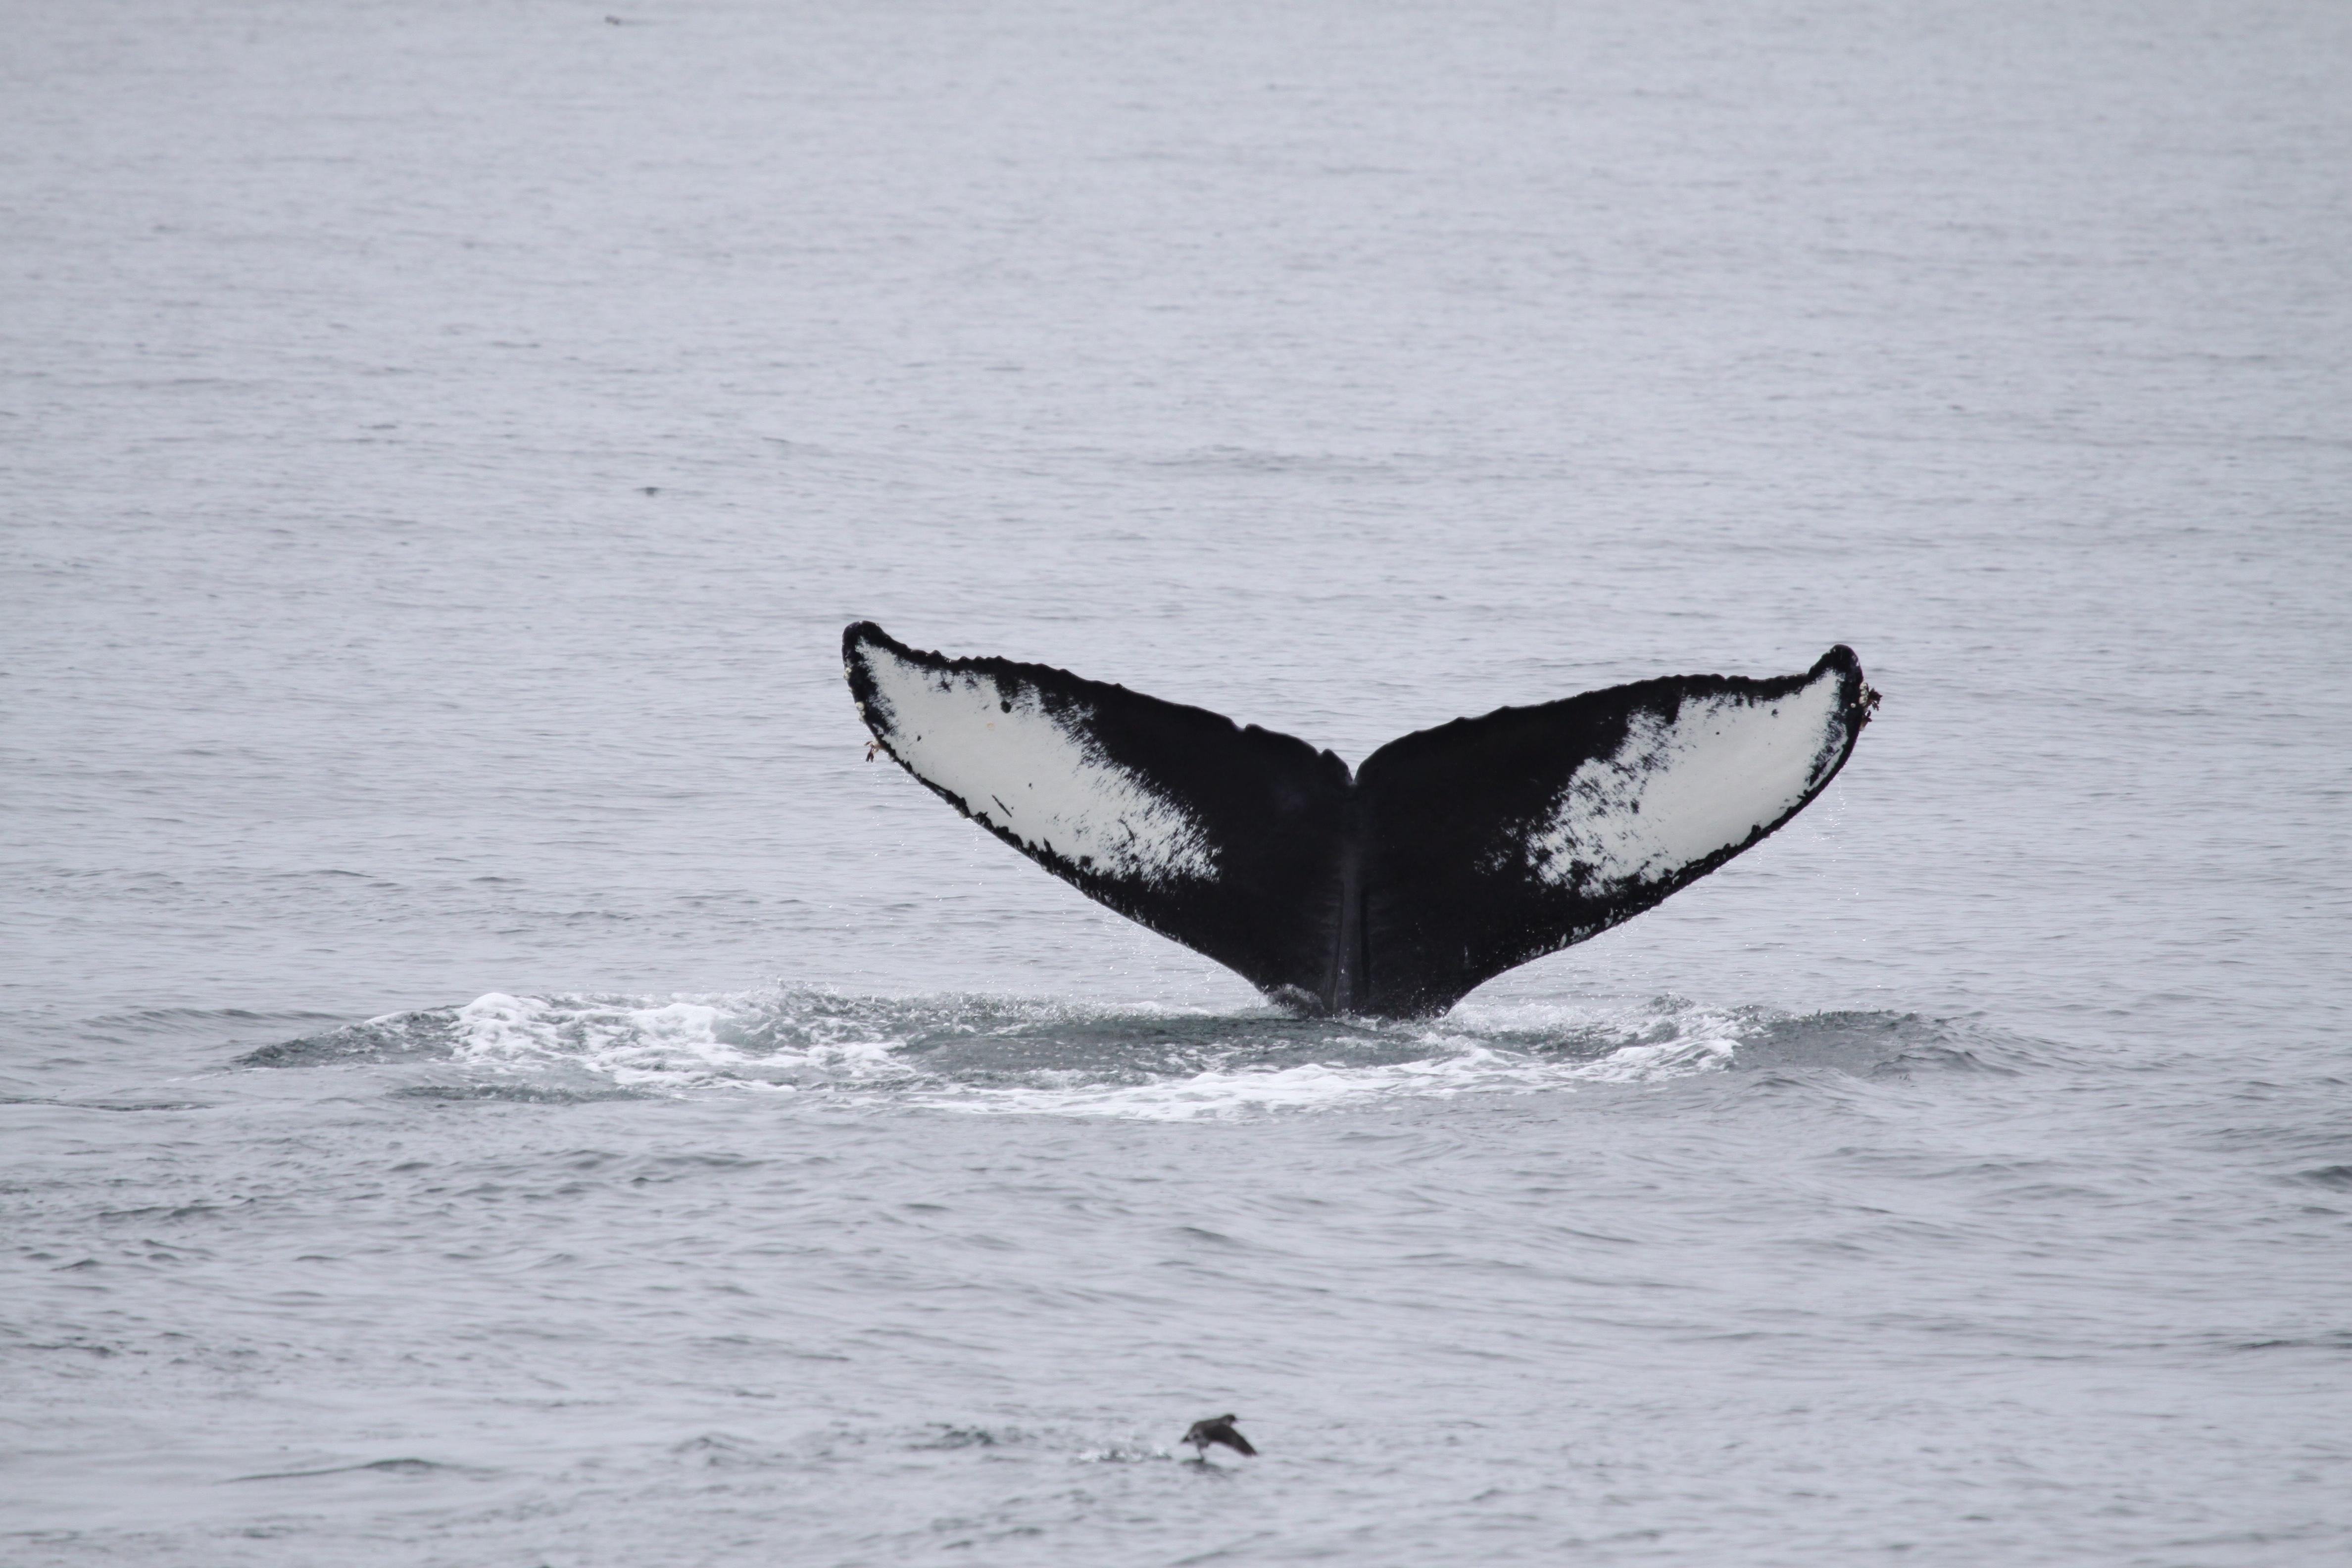 A humpback whale tail (fluke) out of the water